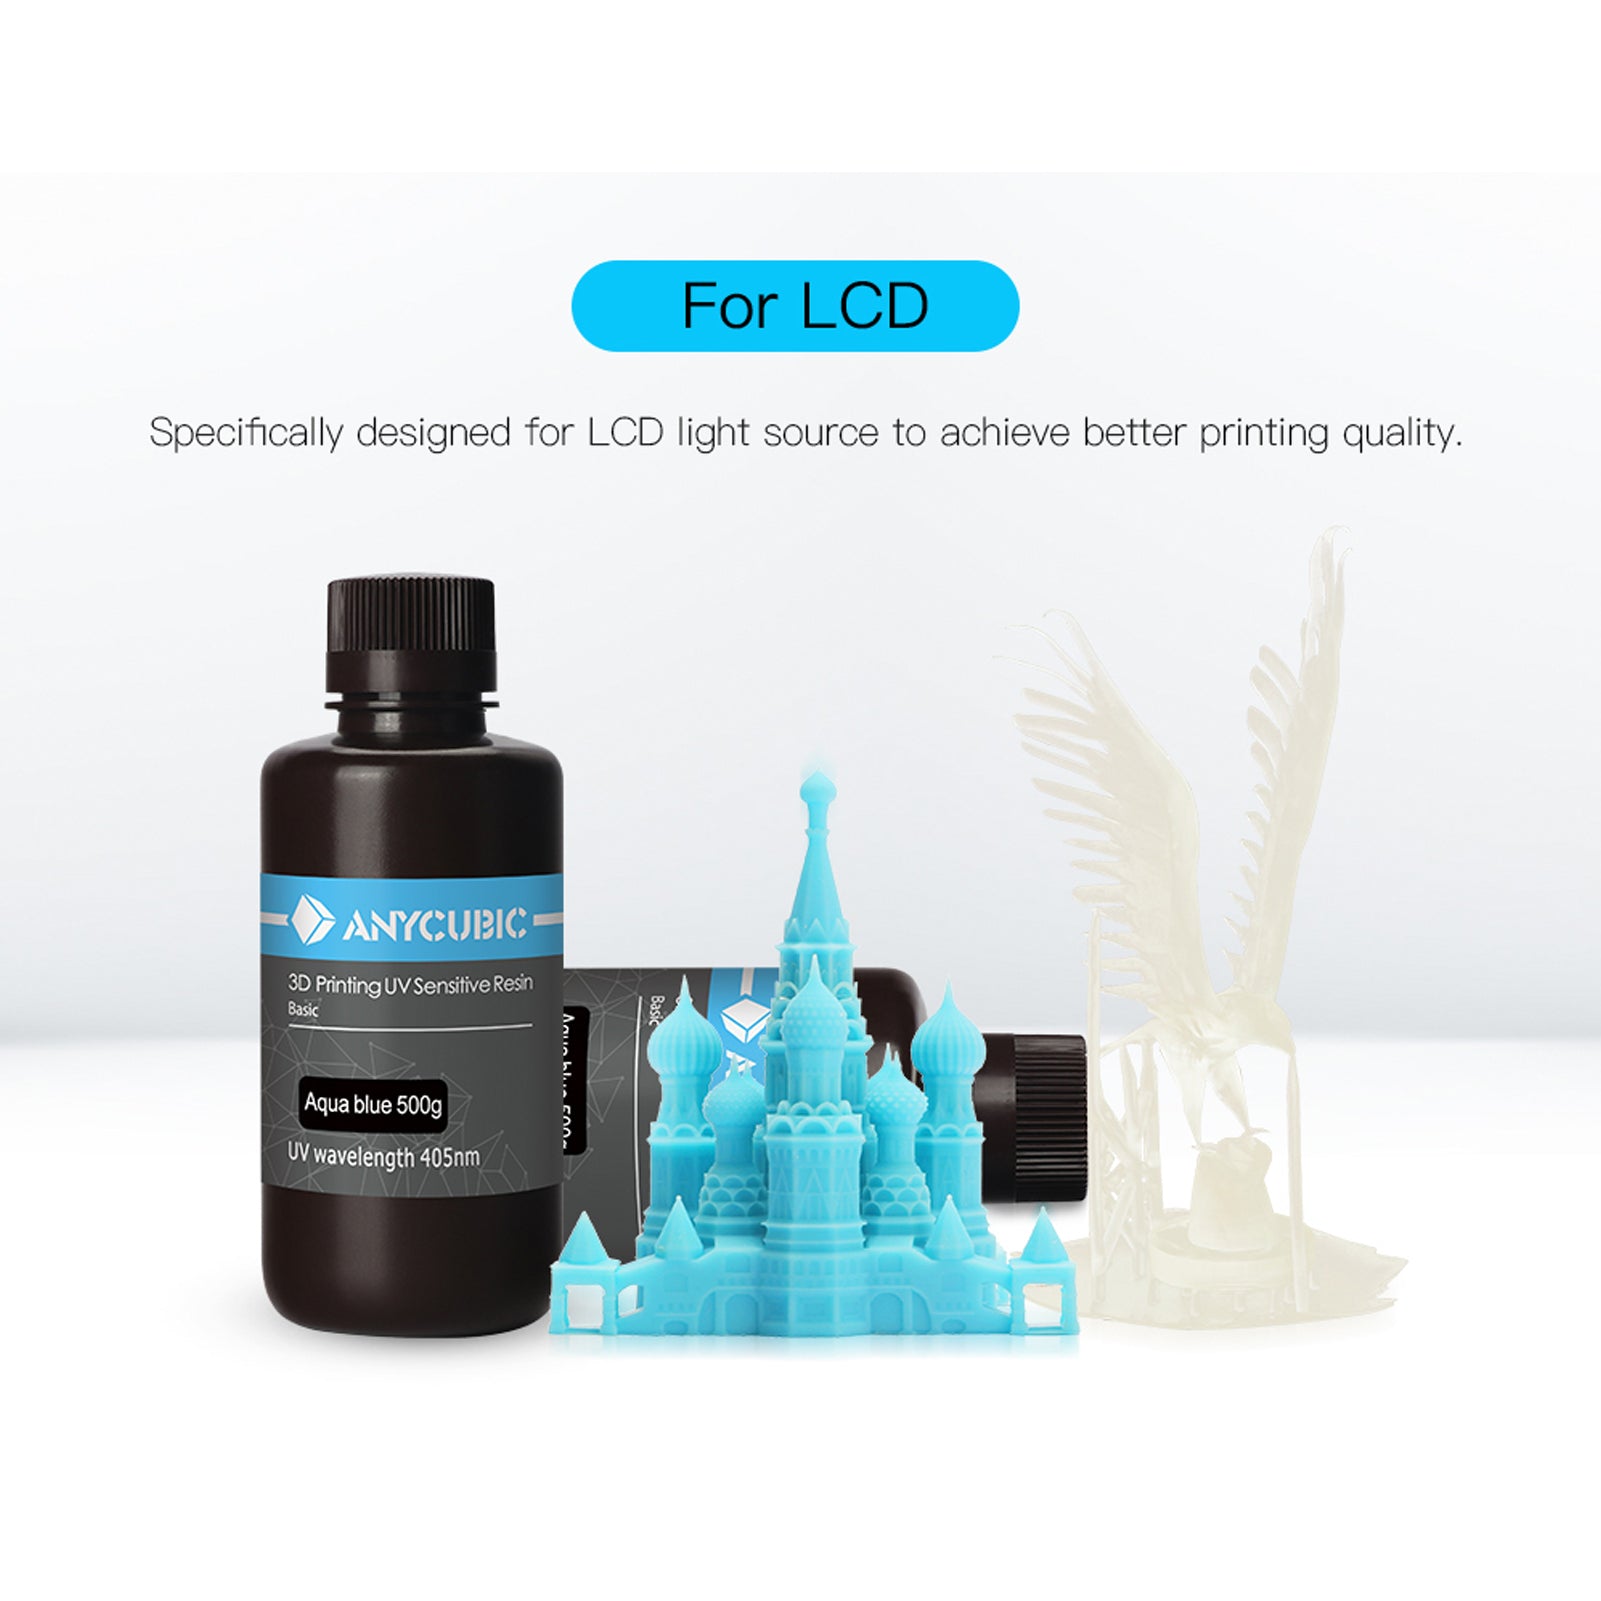 500g ANYCUBIC 3D Printer Resin 405nm LCD Quick-Curing for LCD 3D Printing Black Grey Green